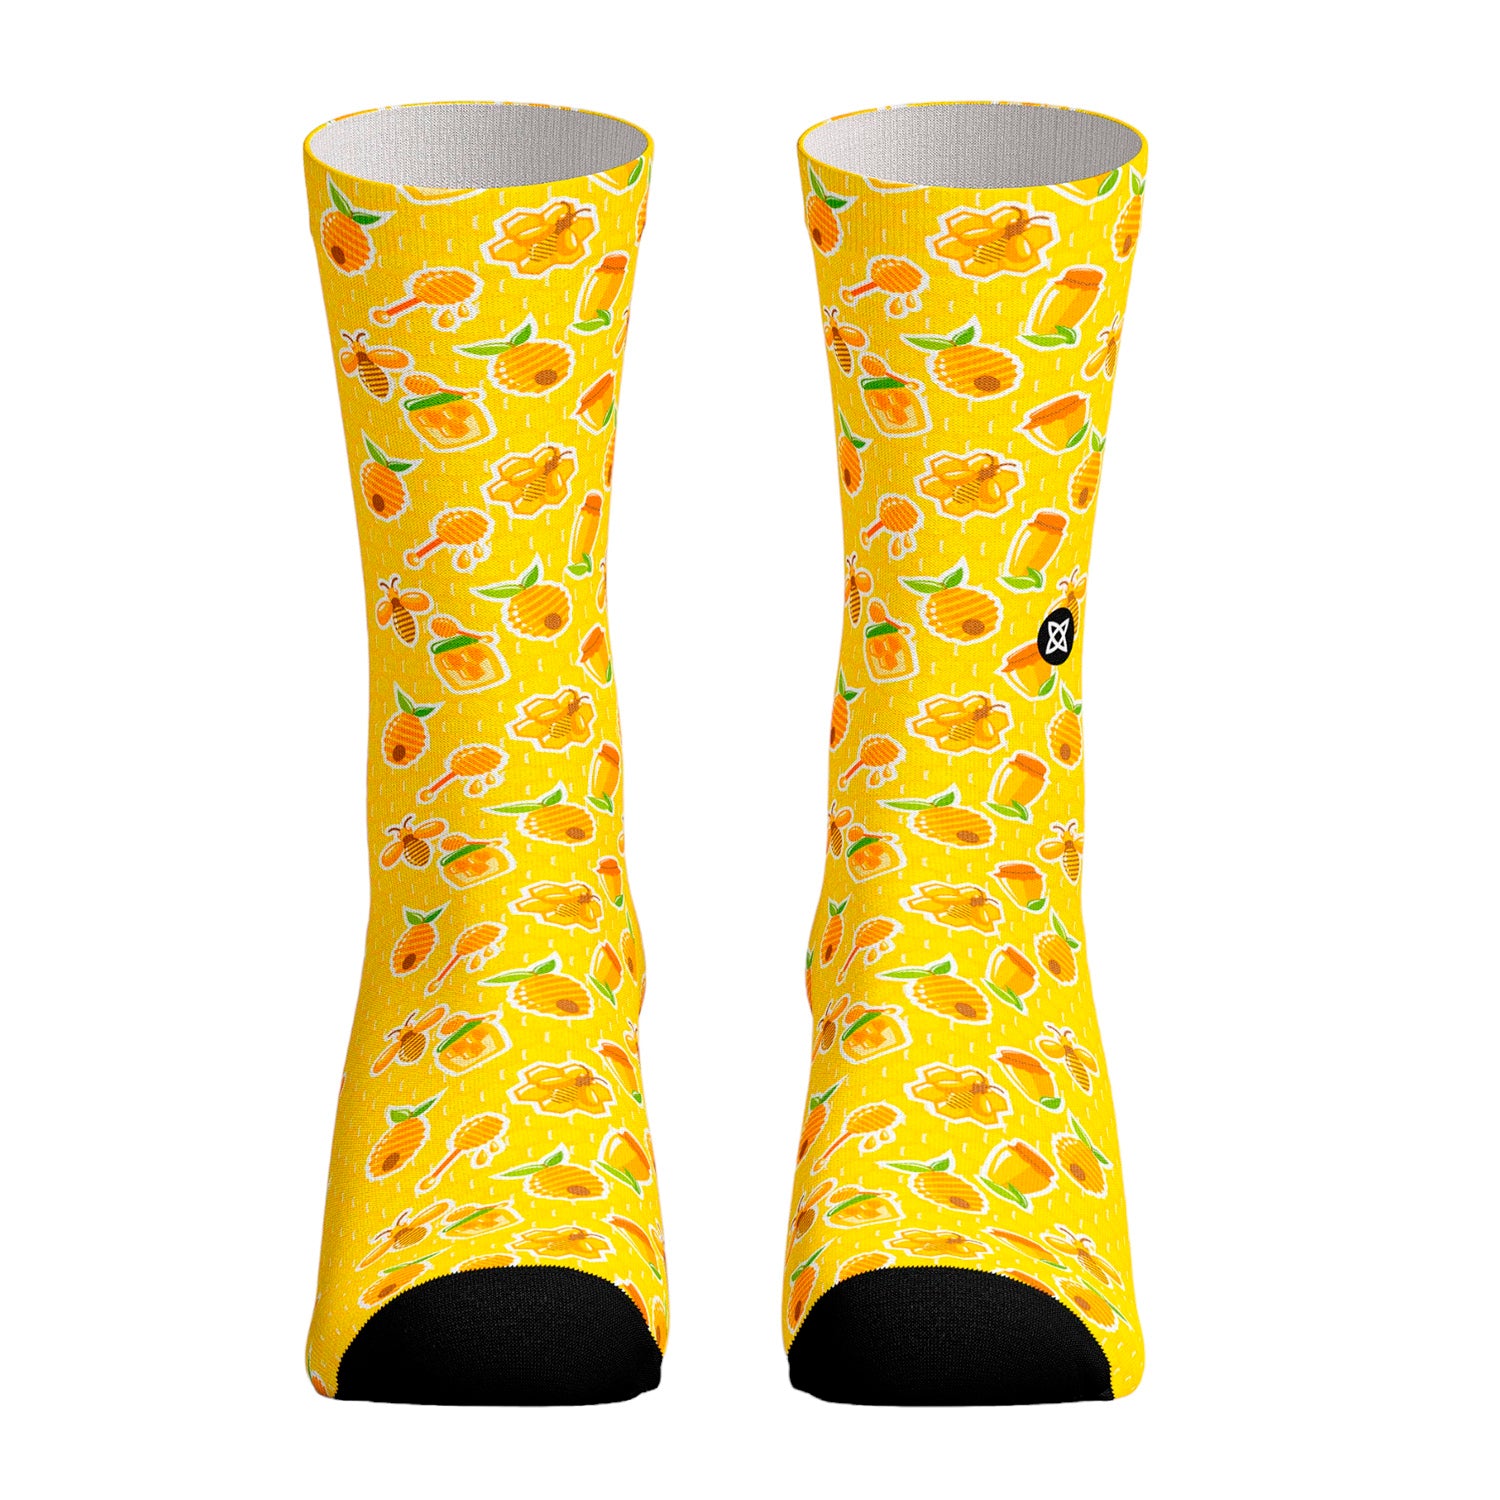 Calcetines Abejas, Calcetines Amarillos – The Print Socks